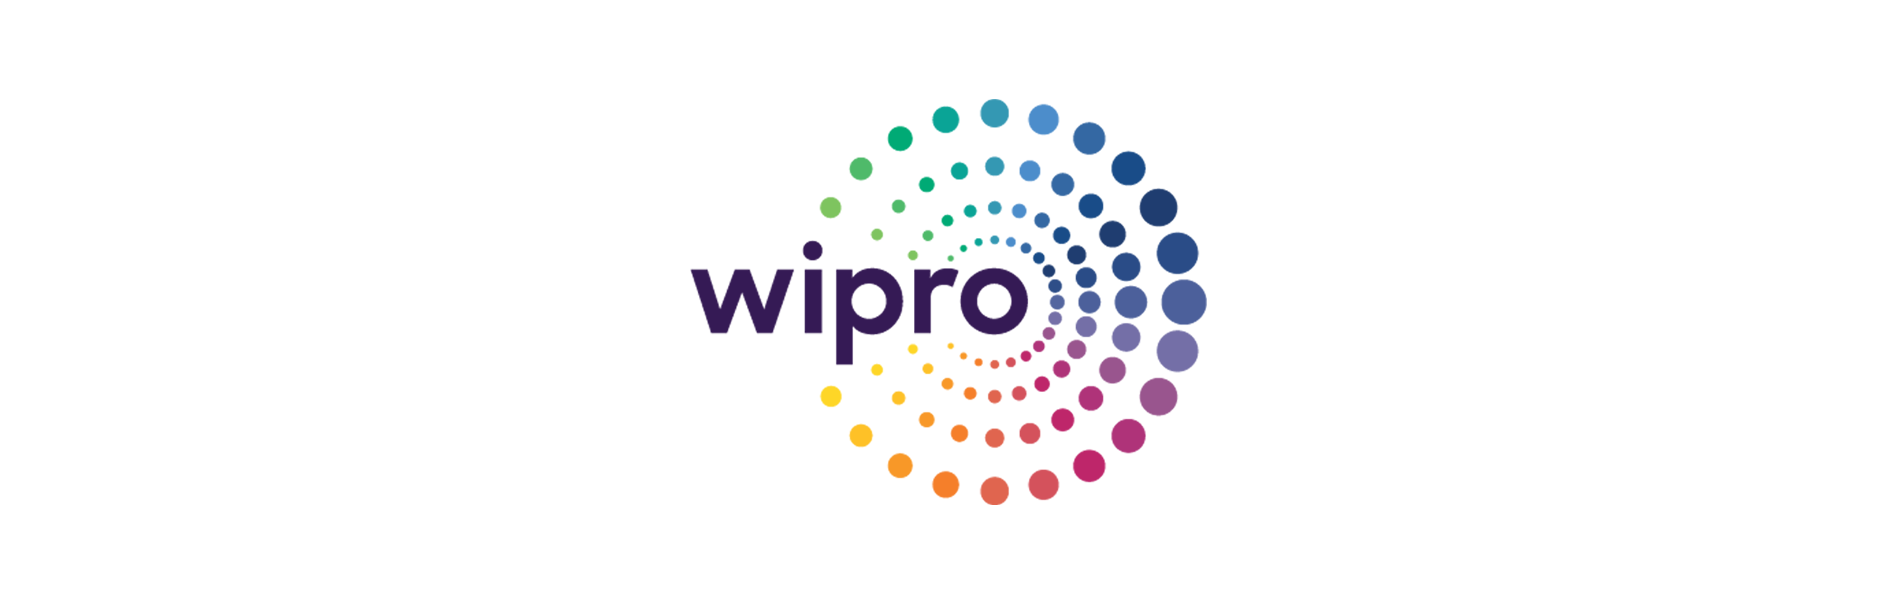 Wipro iX Solutions - Augmented Reality - The Next Disruption